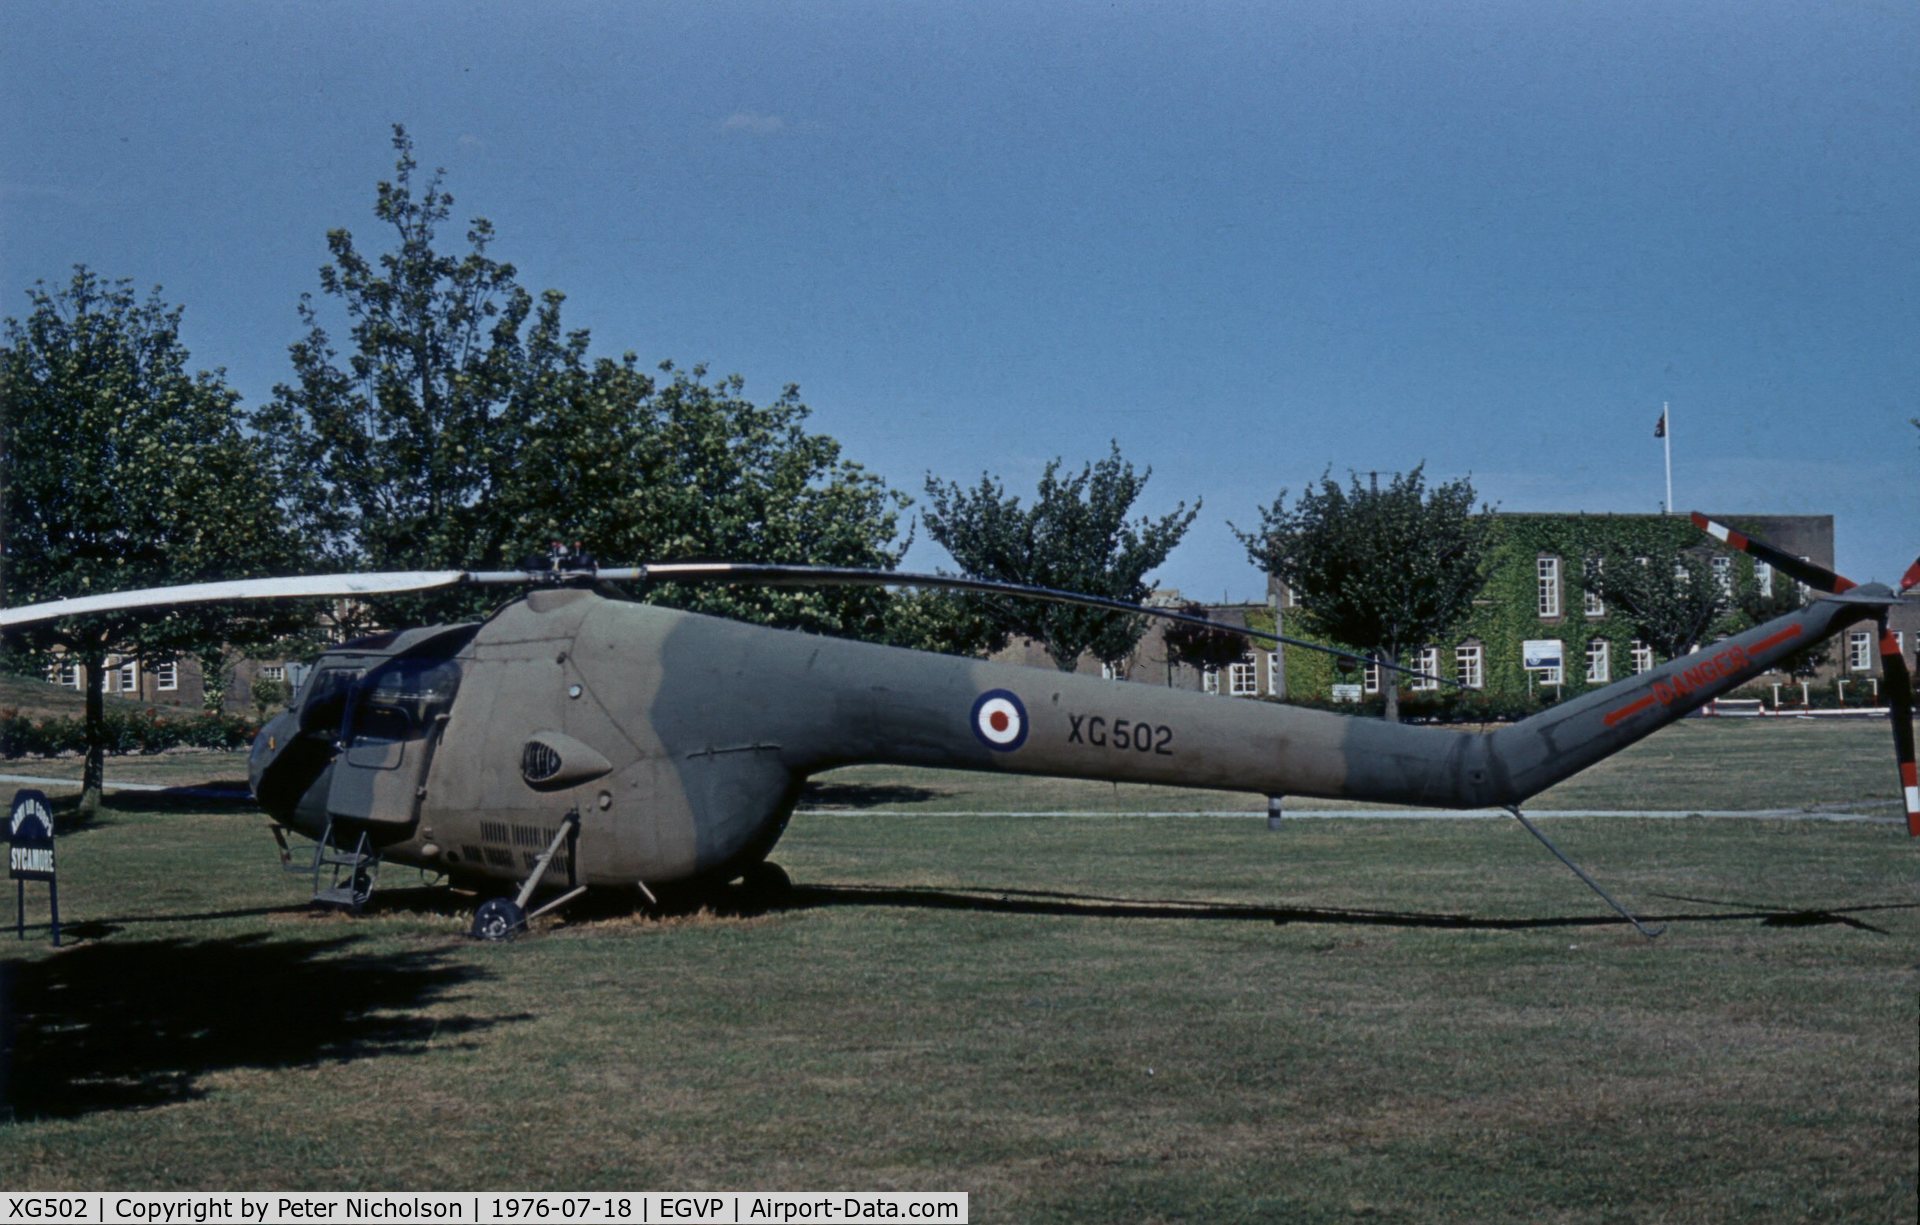 XG502, Bristol 171 Sycamore HR.14 C/N 13247, Sycamore HR.14 XG 502 as a gate guardian at the Army Air Corps base at Middle Wallop in the Summer of 1976.